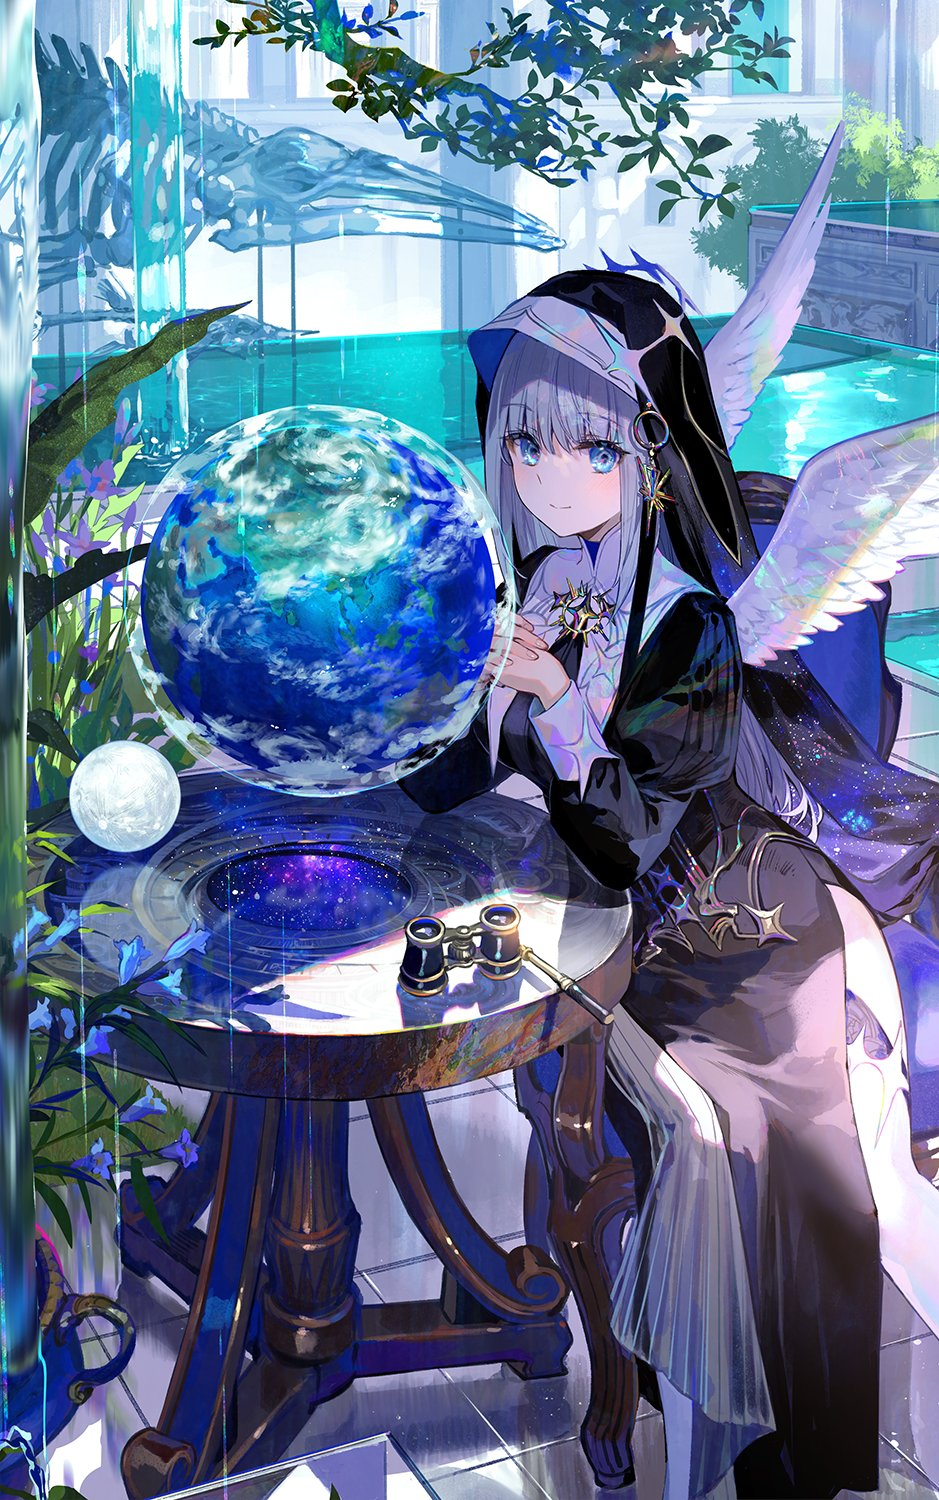 Anime Anime Girls Fuji Choko Portrait Display Nuns Nun Outfit Smiling Looking At Viewer Planet Table 939x1500